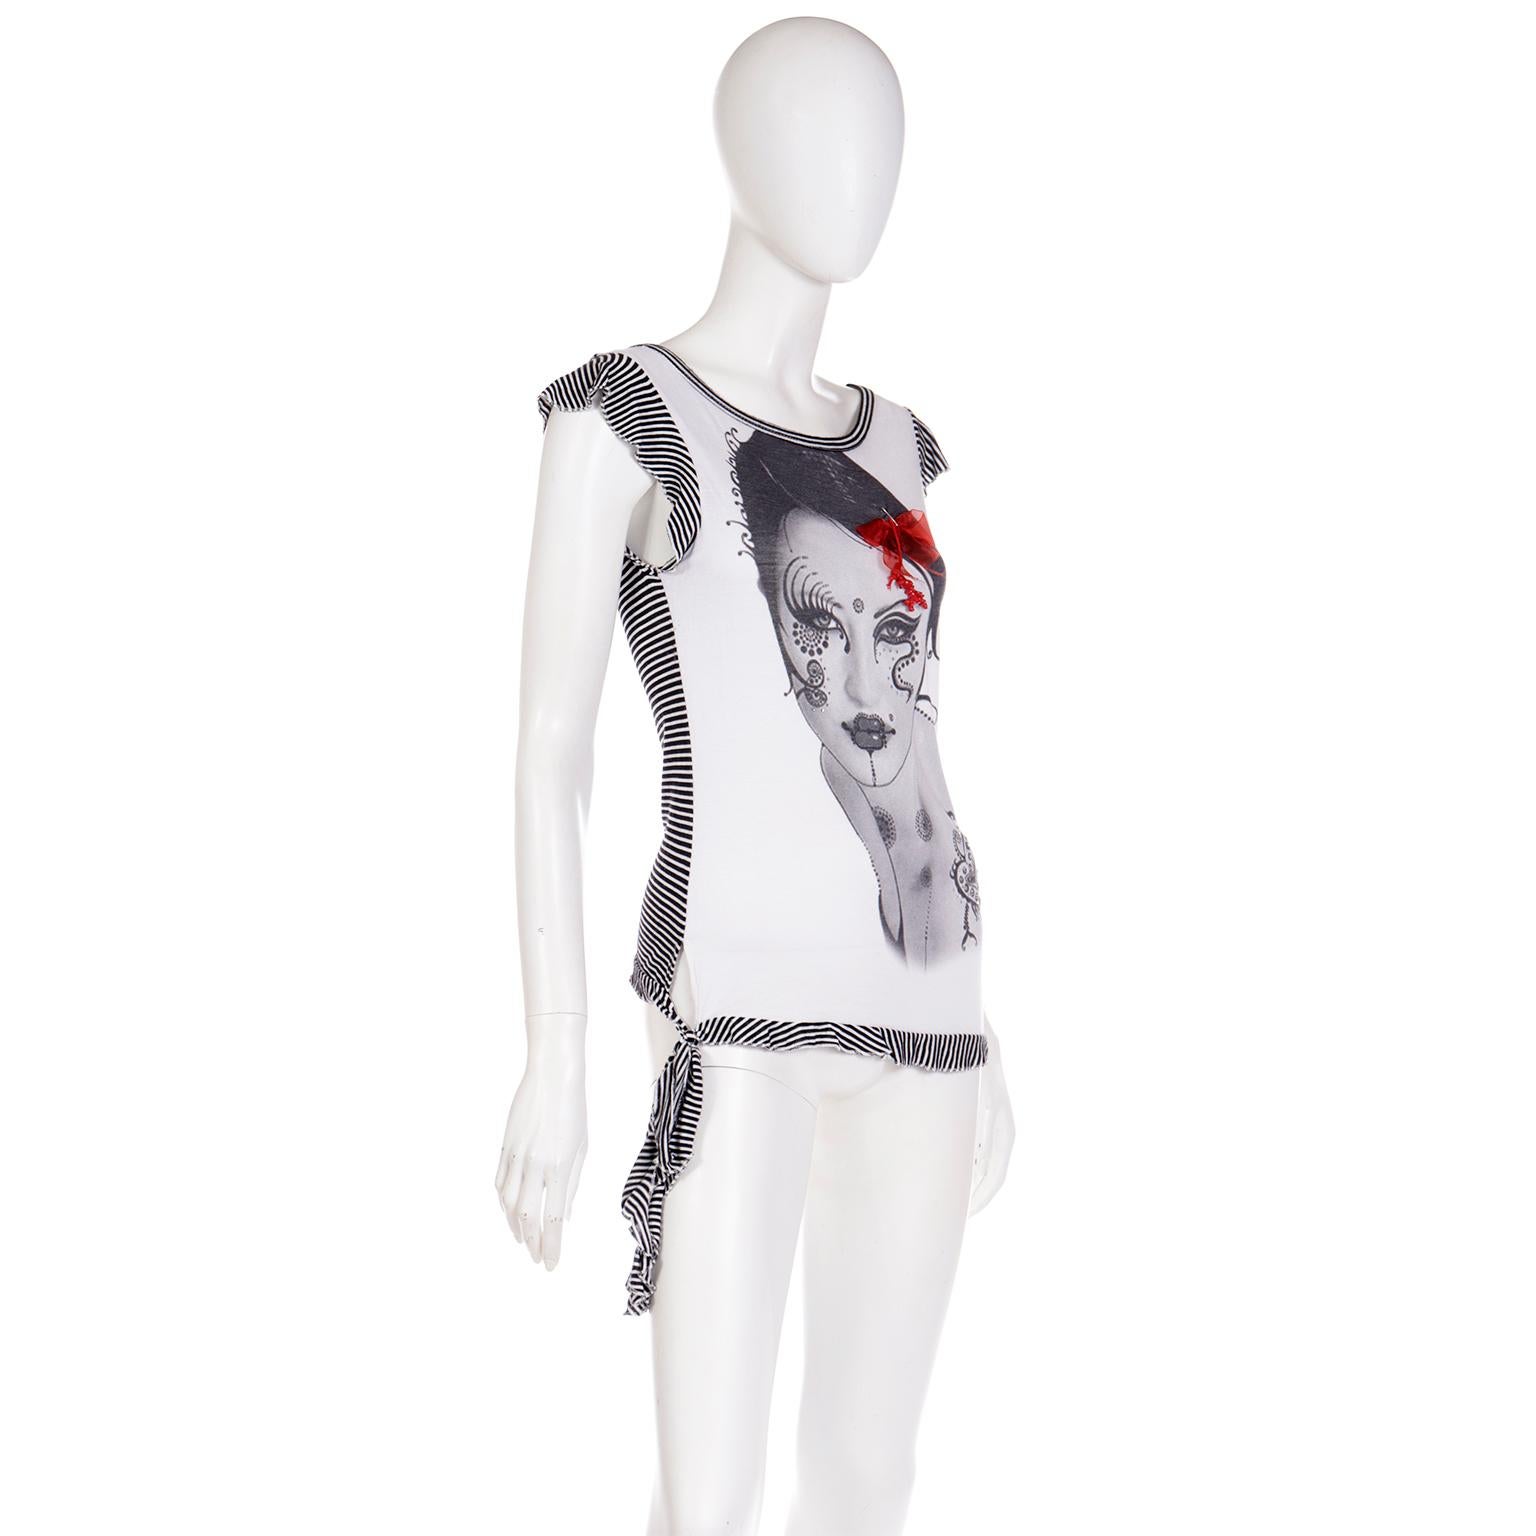 Gianfranco Ferre Black & White Vintage Novelty Top W Woman's Face & Rhinestones In Excellent Condition For Sale In Portland, OR